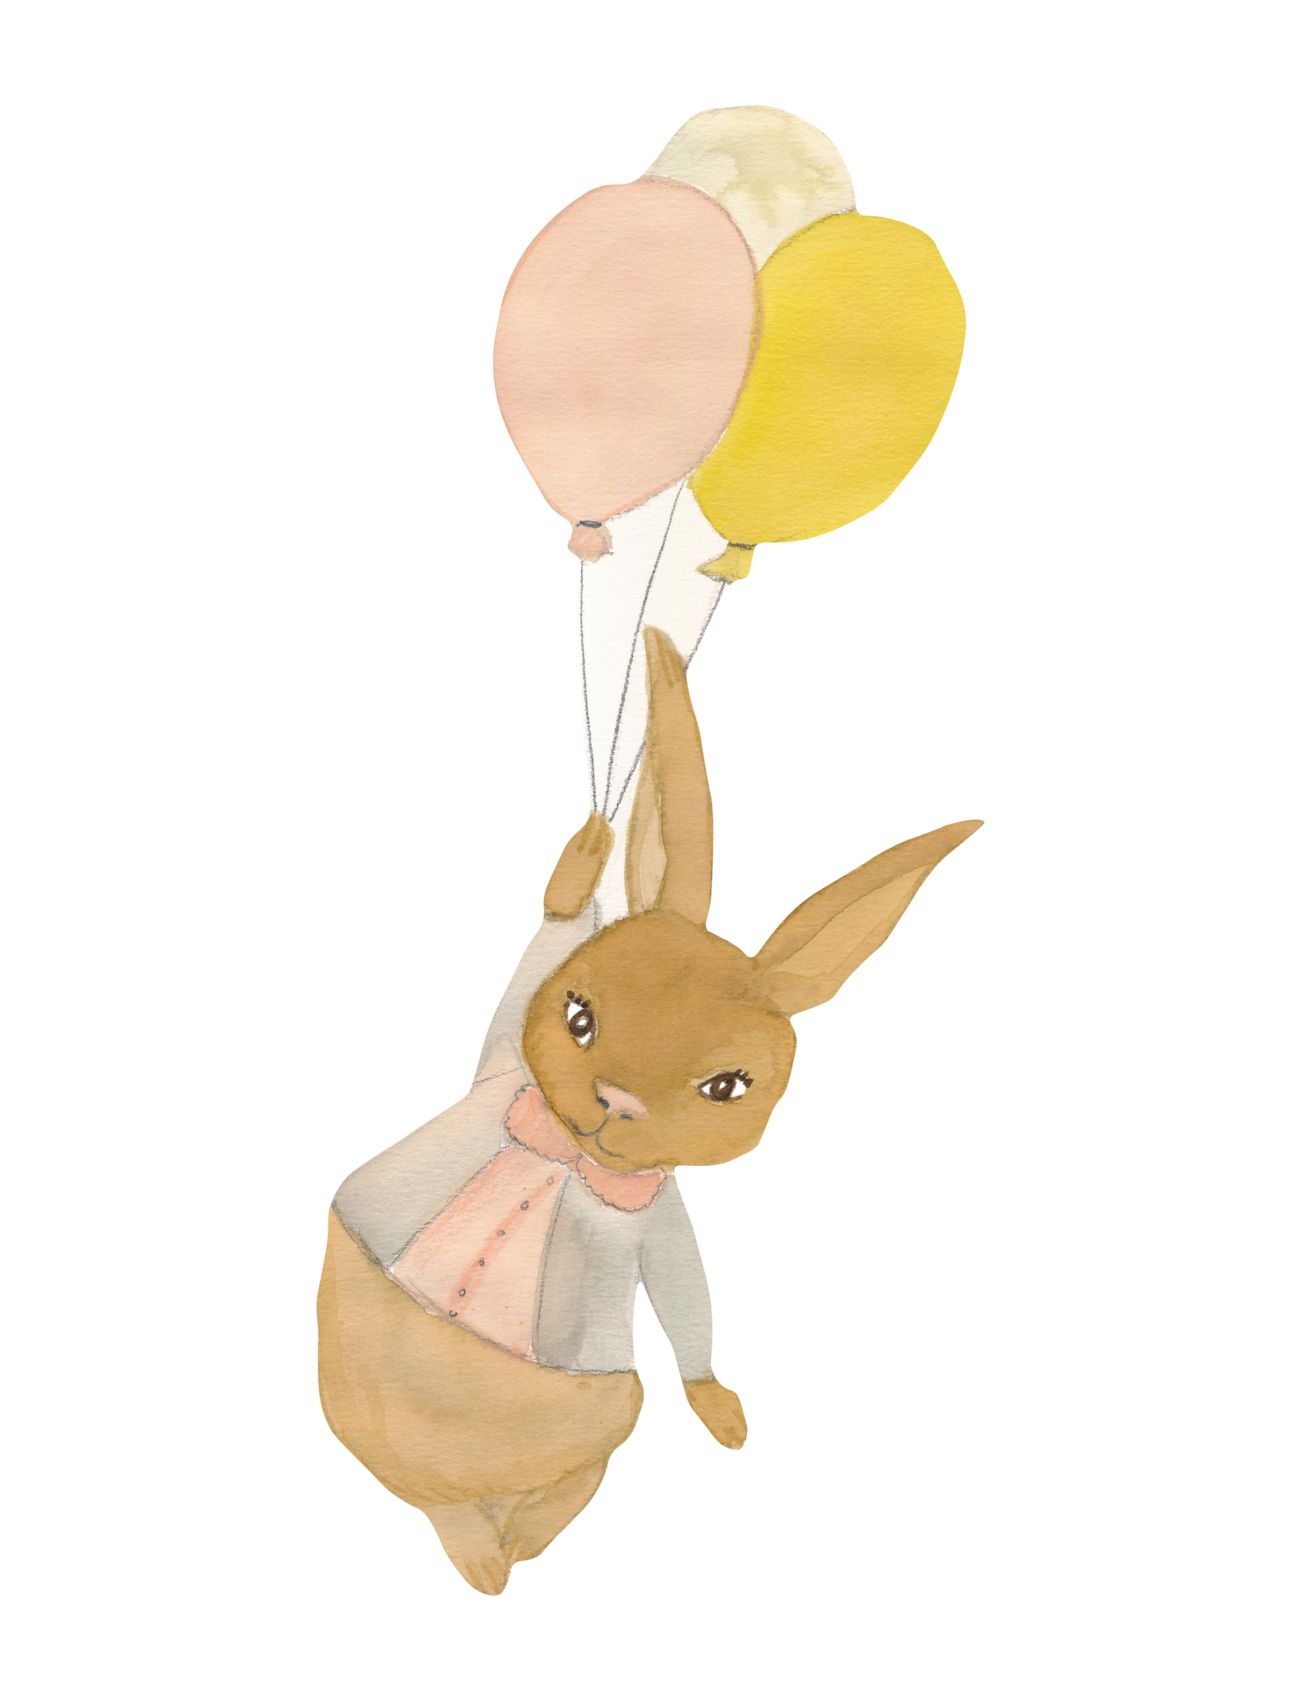 Rabbit Girl Airballoon Home Kids Decor Wall Stickers Animals Brown That's Mine